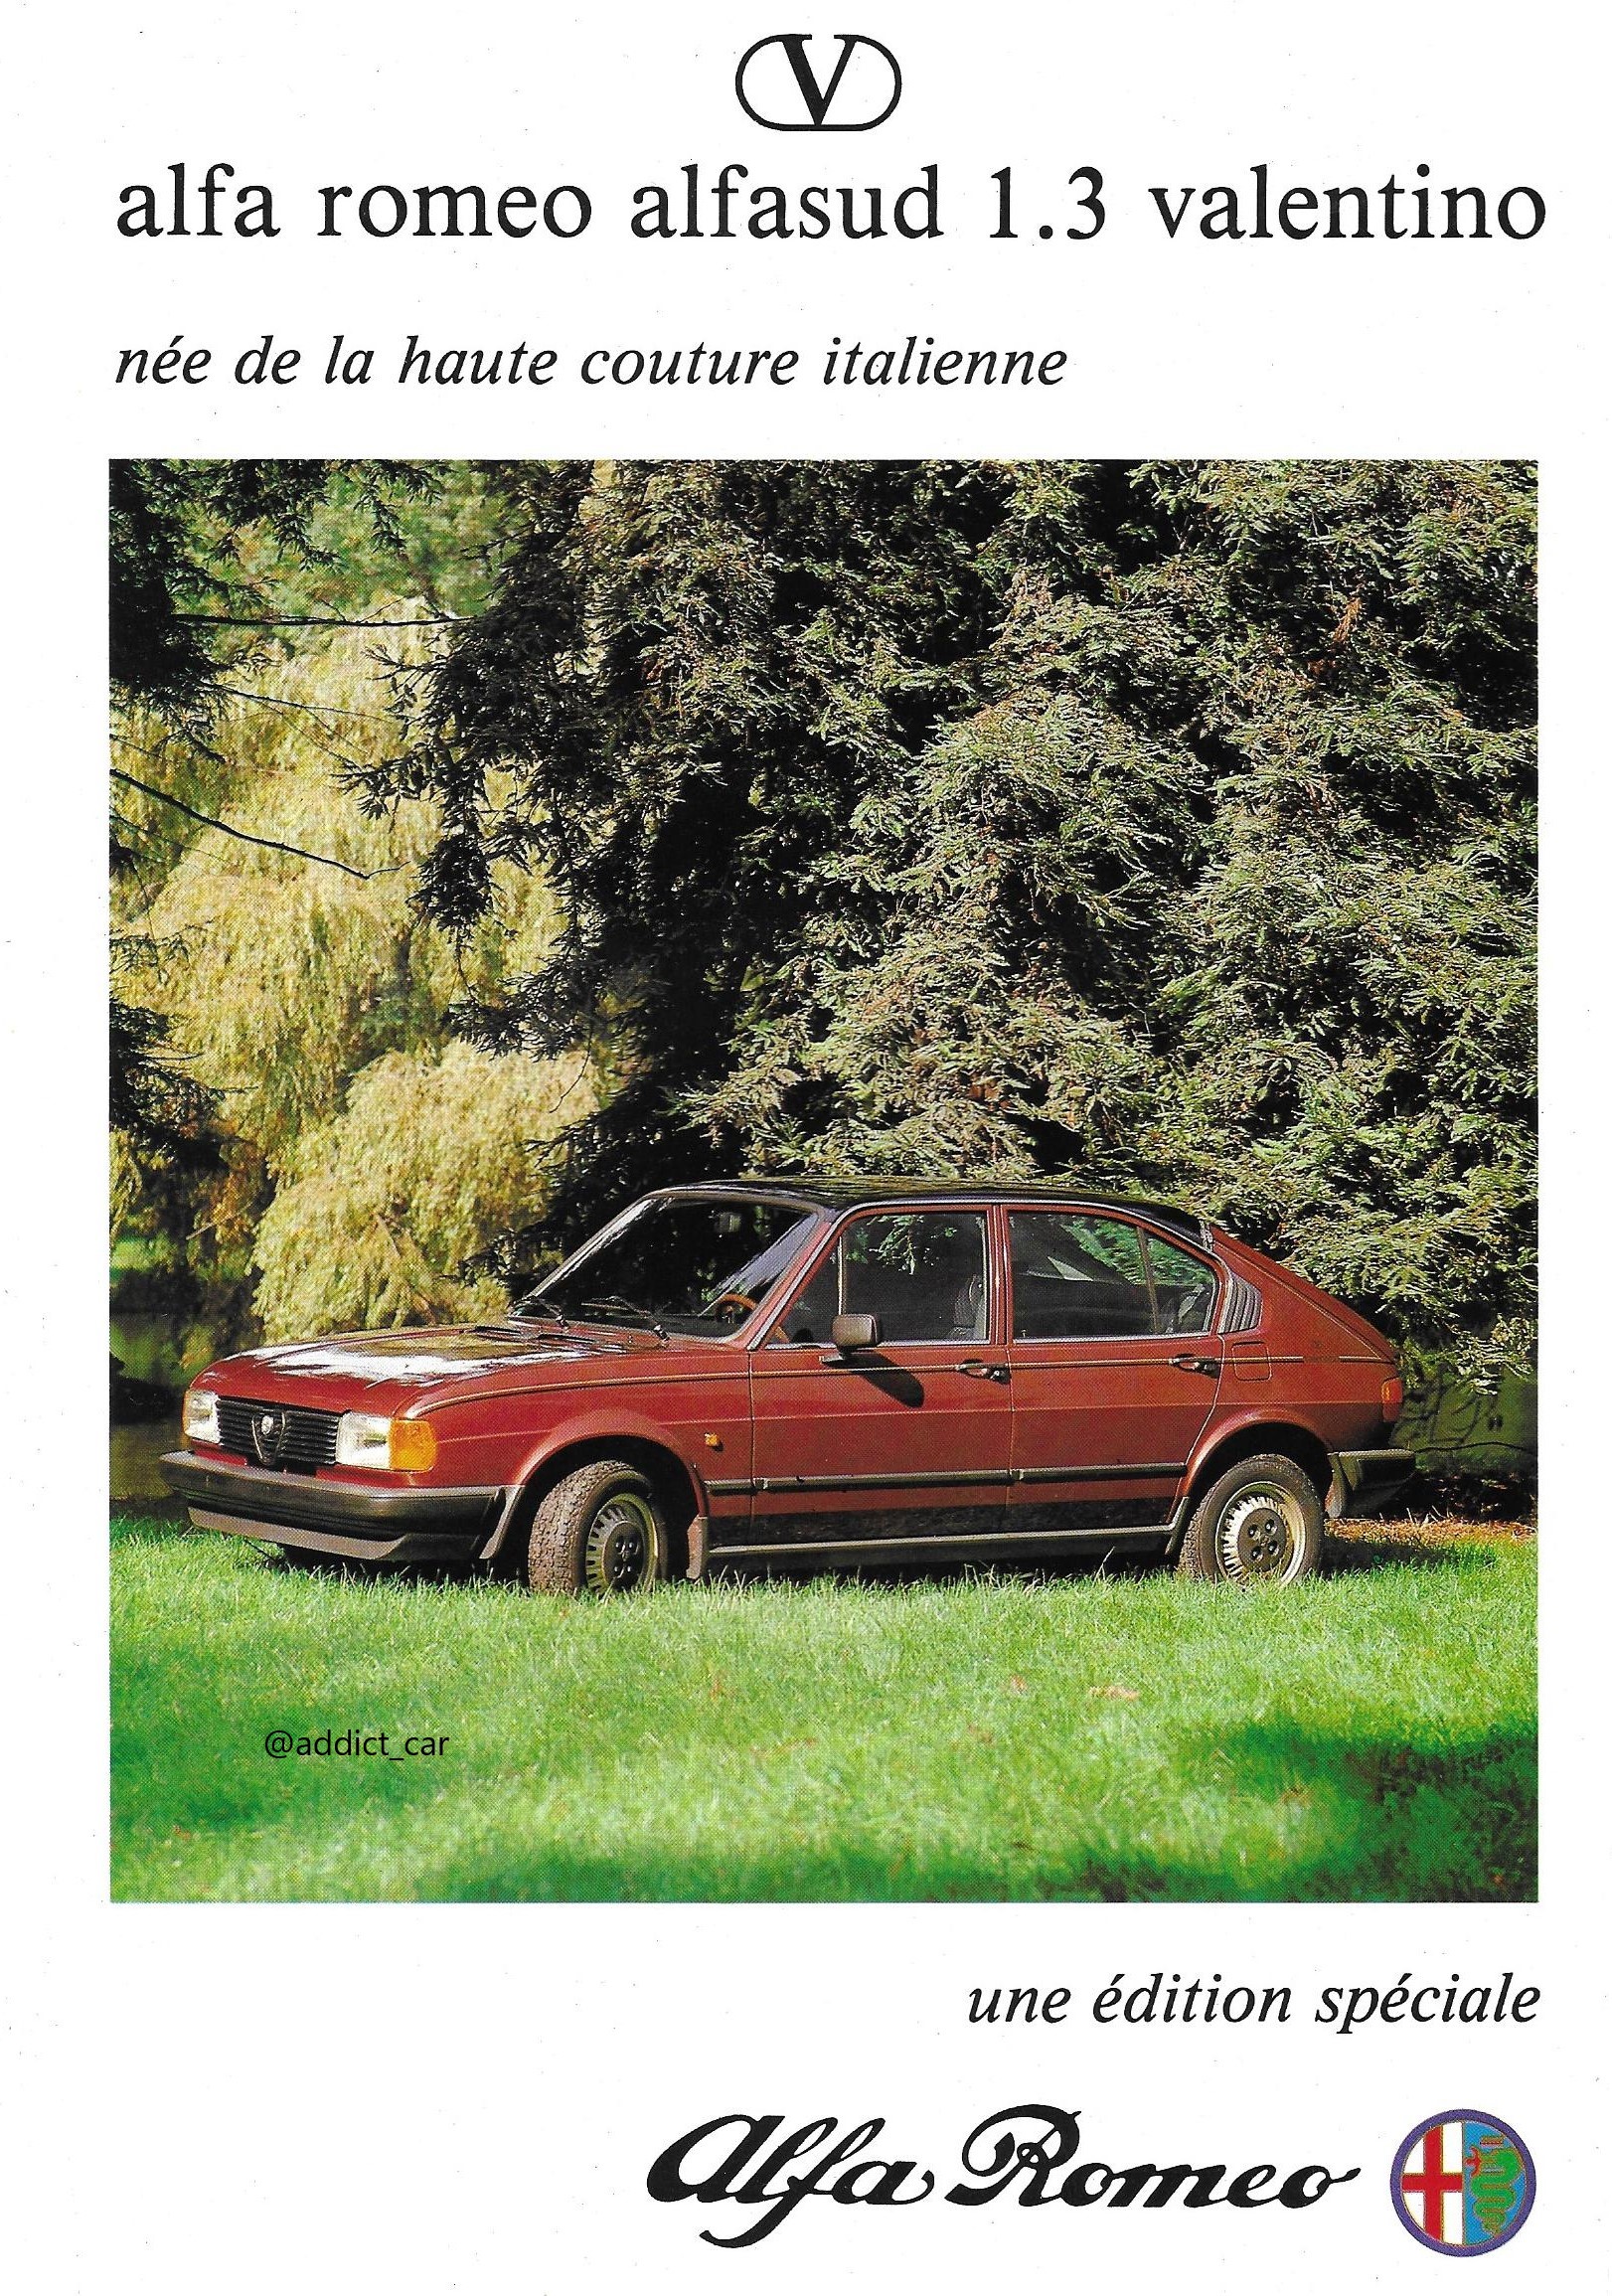 Car Brochure Addict on "On St Valentine's Day let's remember one of more unusual of the Alfa Romeo Alfasud. The bronze Valentino 1.3 saloon in this 1980 French leaflet